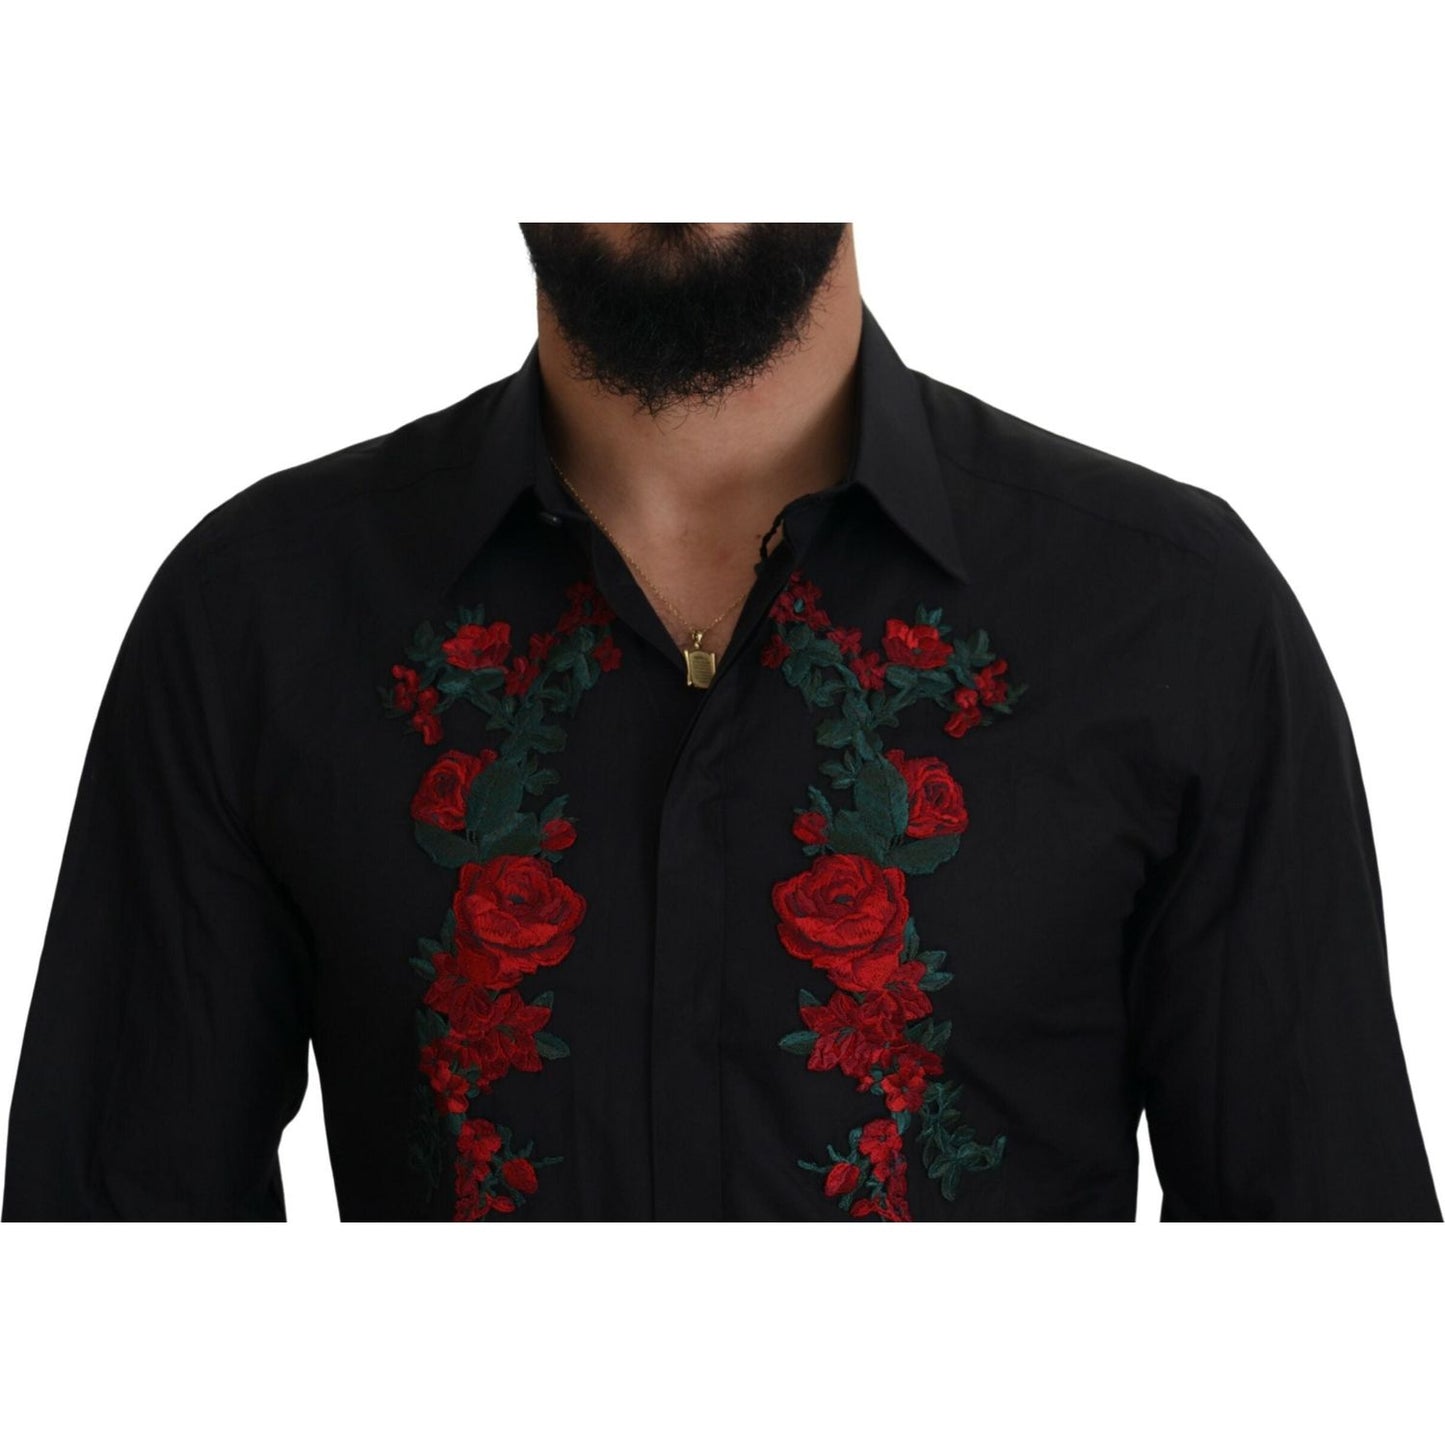 Dolce & Gabbana Elegant Floral Embroidered Cotton Shirt black-floral-embroidery-men-long-sleeves-gold-shirt IMG_6990-scaled-ce0c5977-1a3.jpg